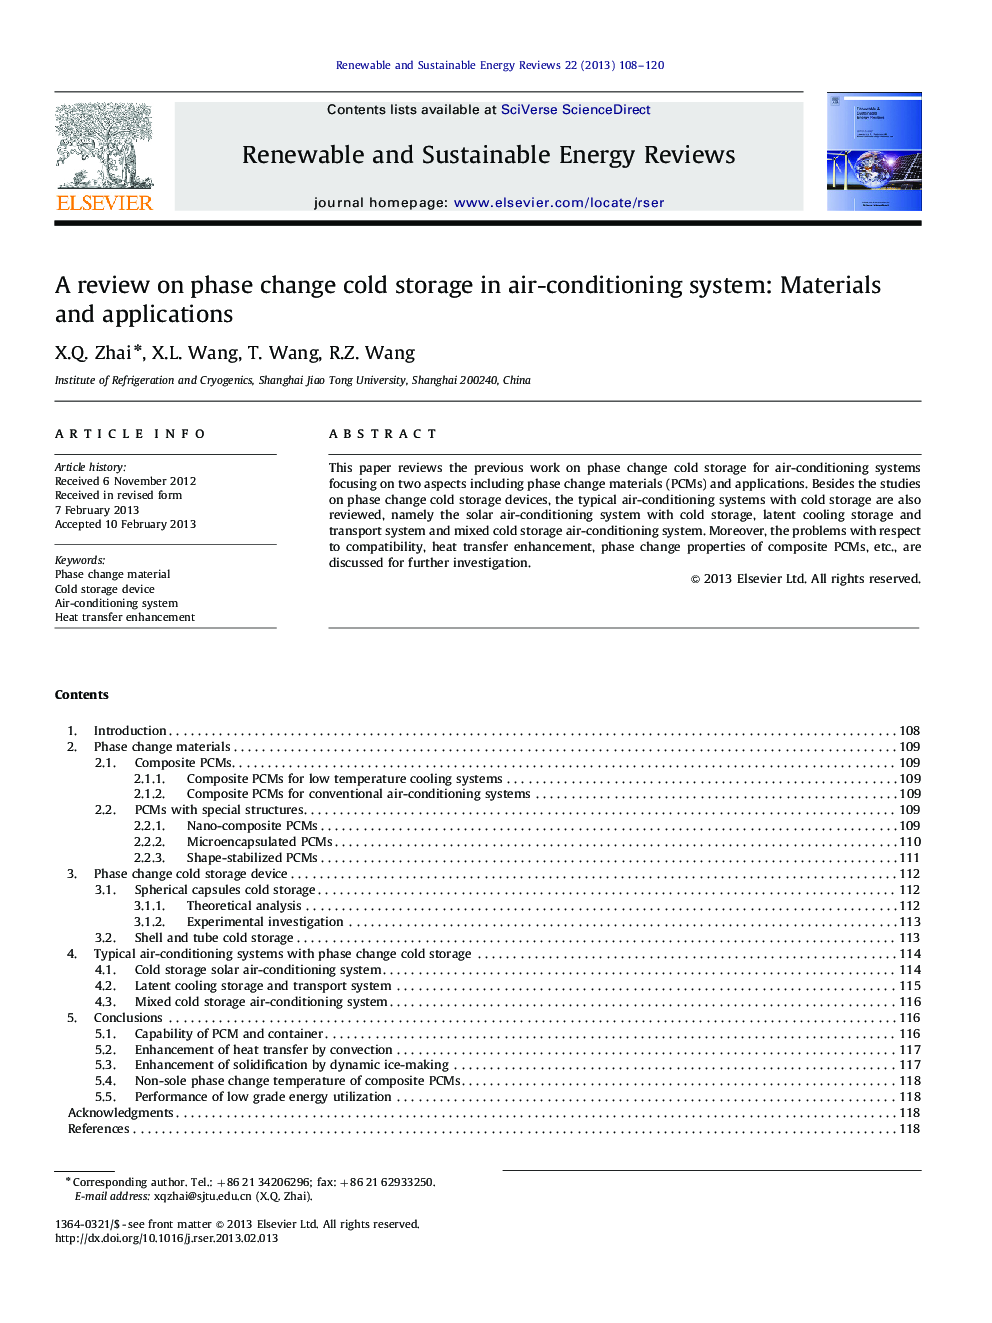 A review on phase change cold storage in air-conditioning system: Materials and applications